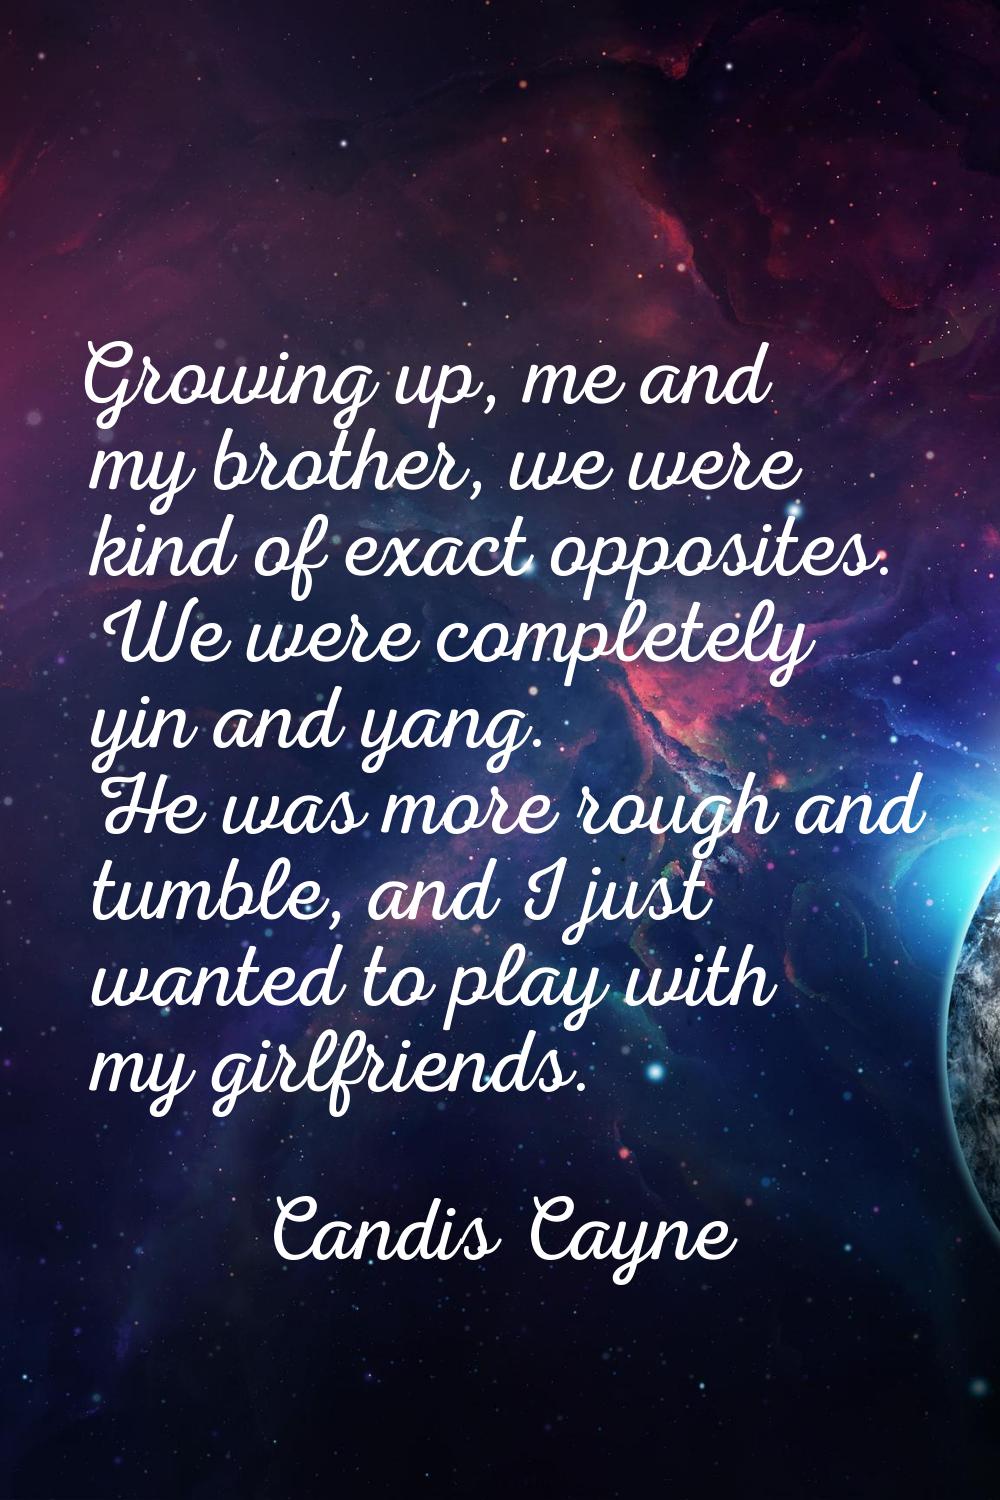 Growing up, me and my brother, we were kind of exact opposites. We were completely yin and yang. He